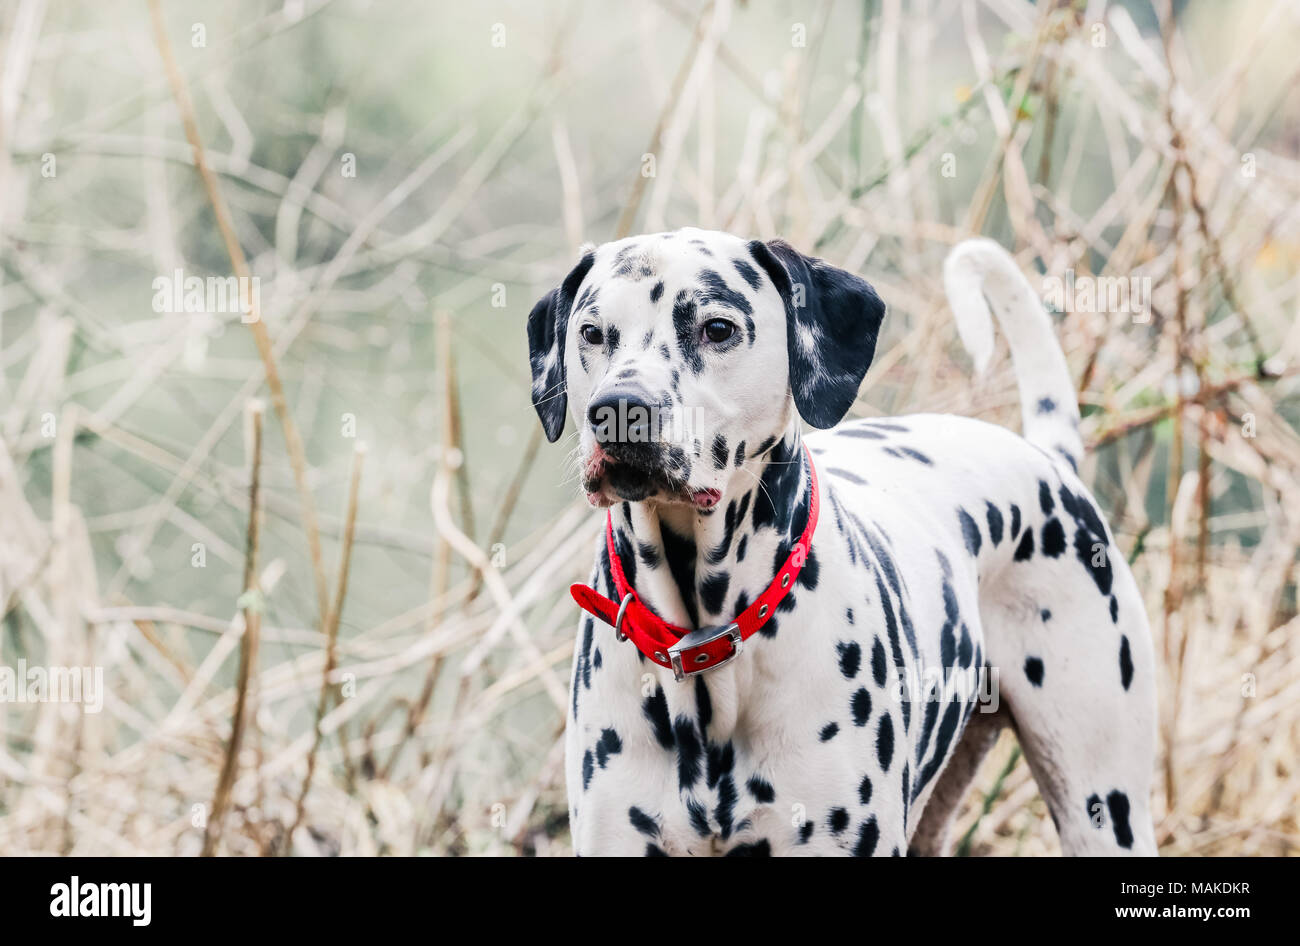 Dalmatian dog out for a walk in the countryside, UK Stock Photo